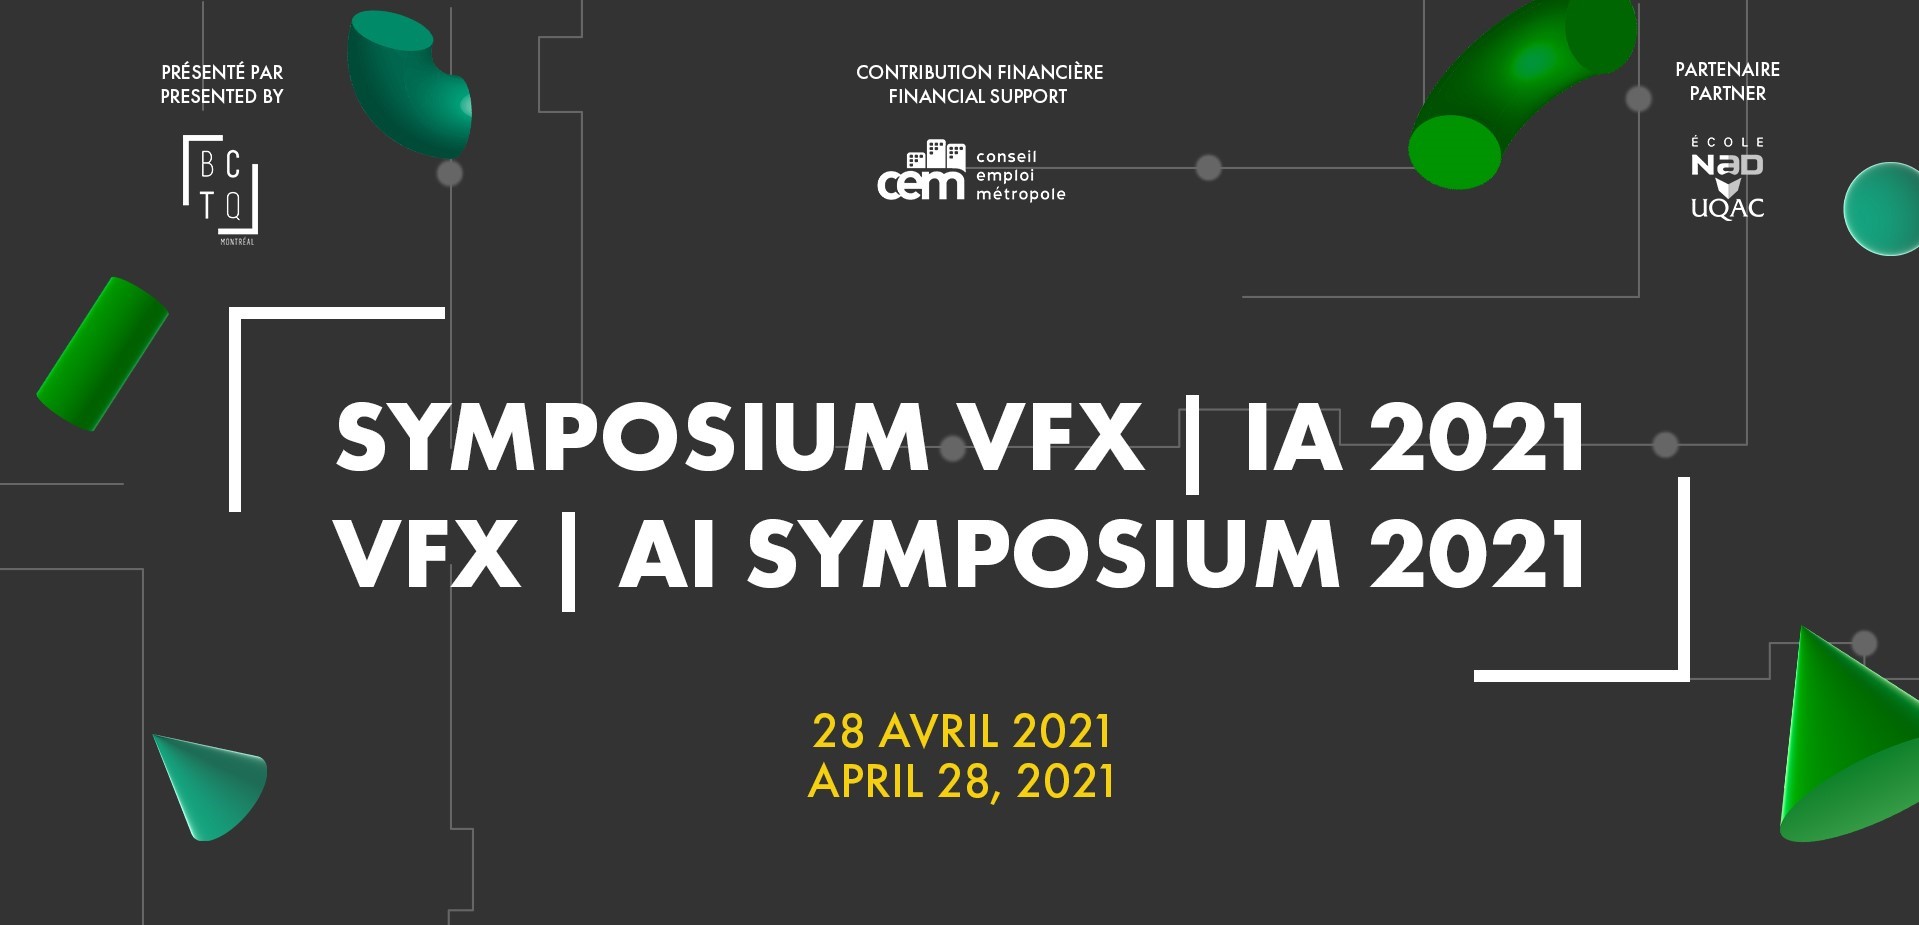 The QFTC Holds Its Very First VFX I AI SYMPOSIUM